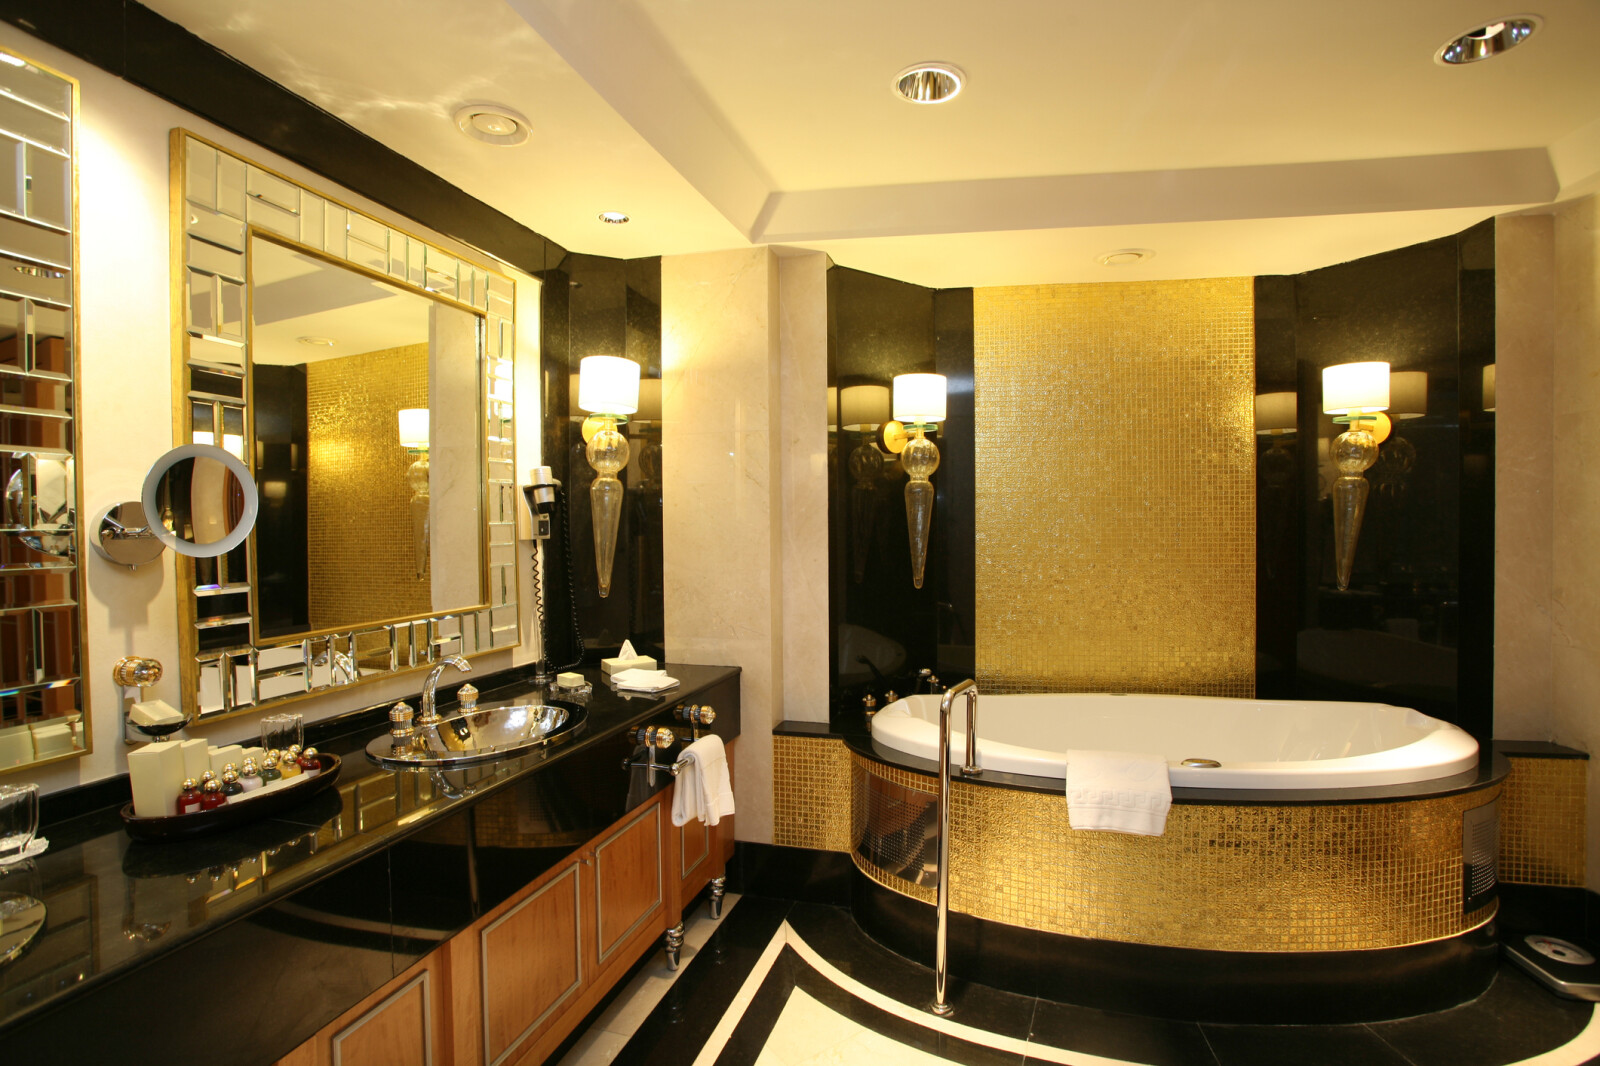 Lifestyle image of a Hotel style bathroom, featuring gold mosaic tiles on the walls and around the jacuzzi style bathtub, black and white floor tiles, cherry brown wooden cabinets with silver feet, black gloss countertop with inset chrome basin, decorative basin tap nobs and gold trim around the mirrors